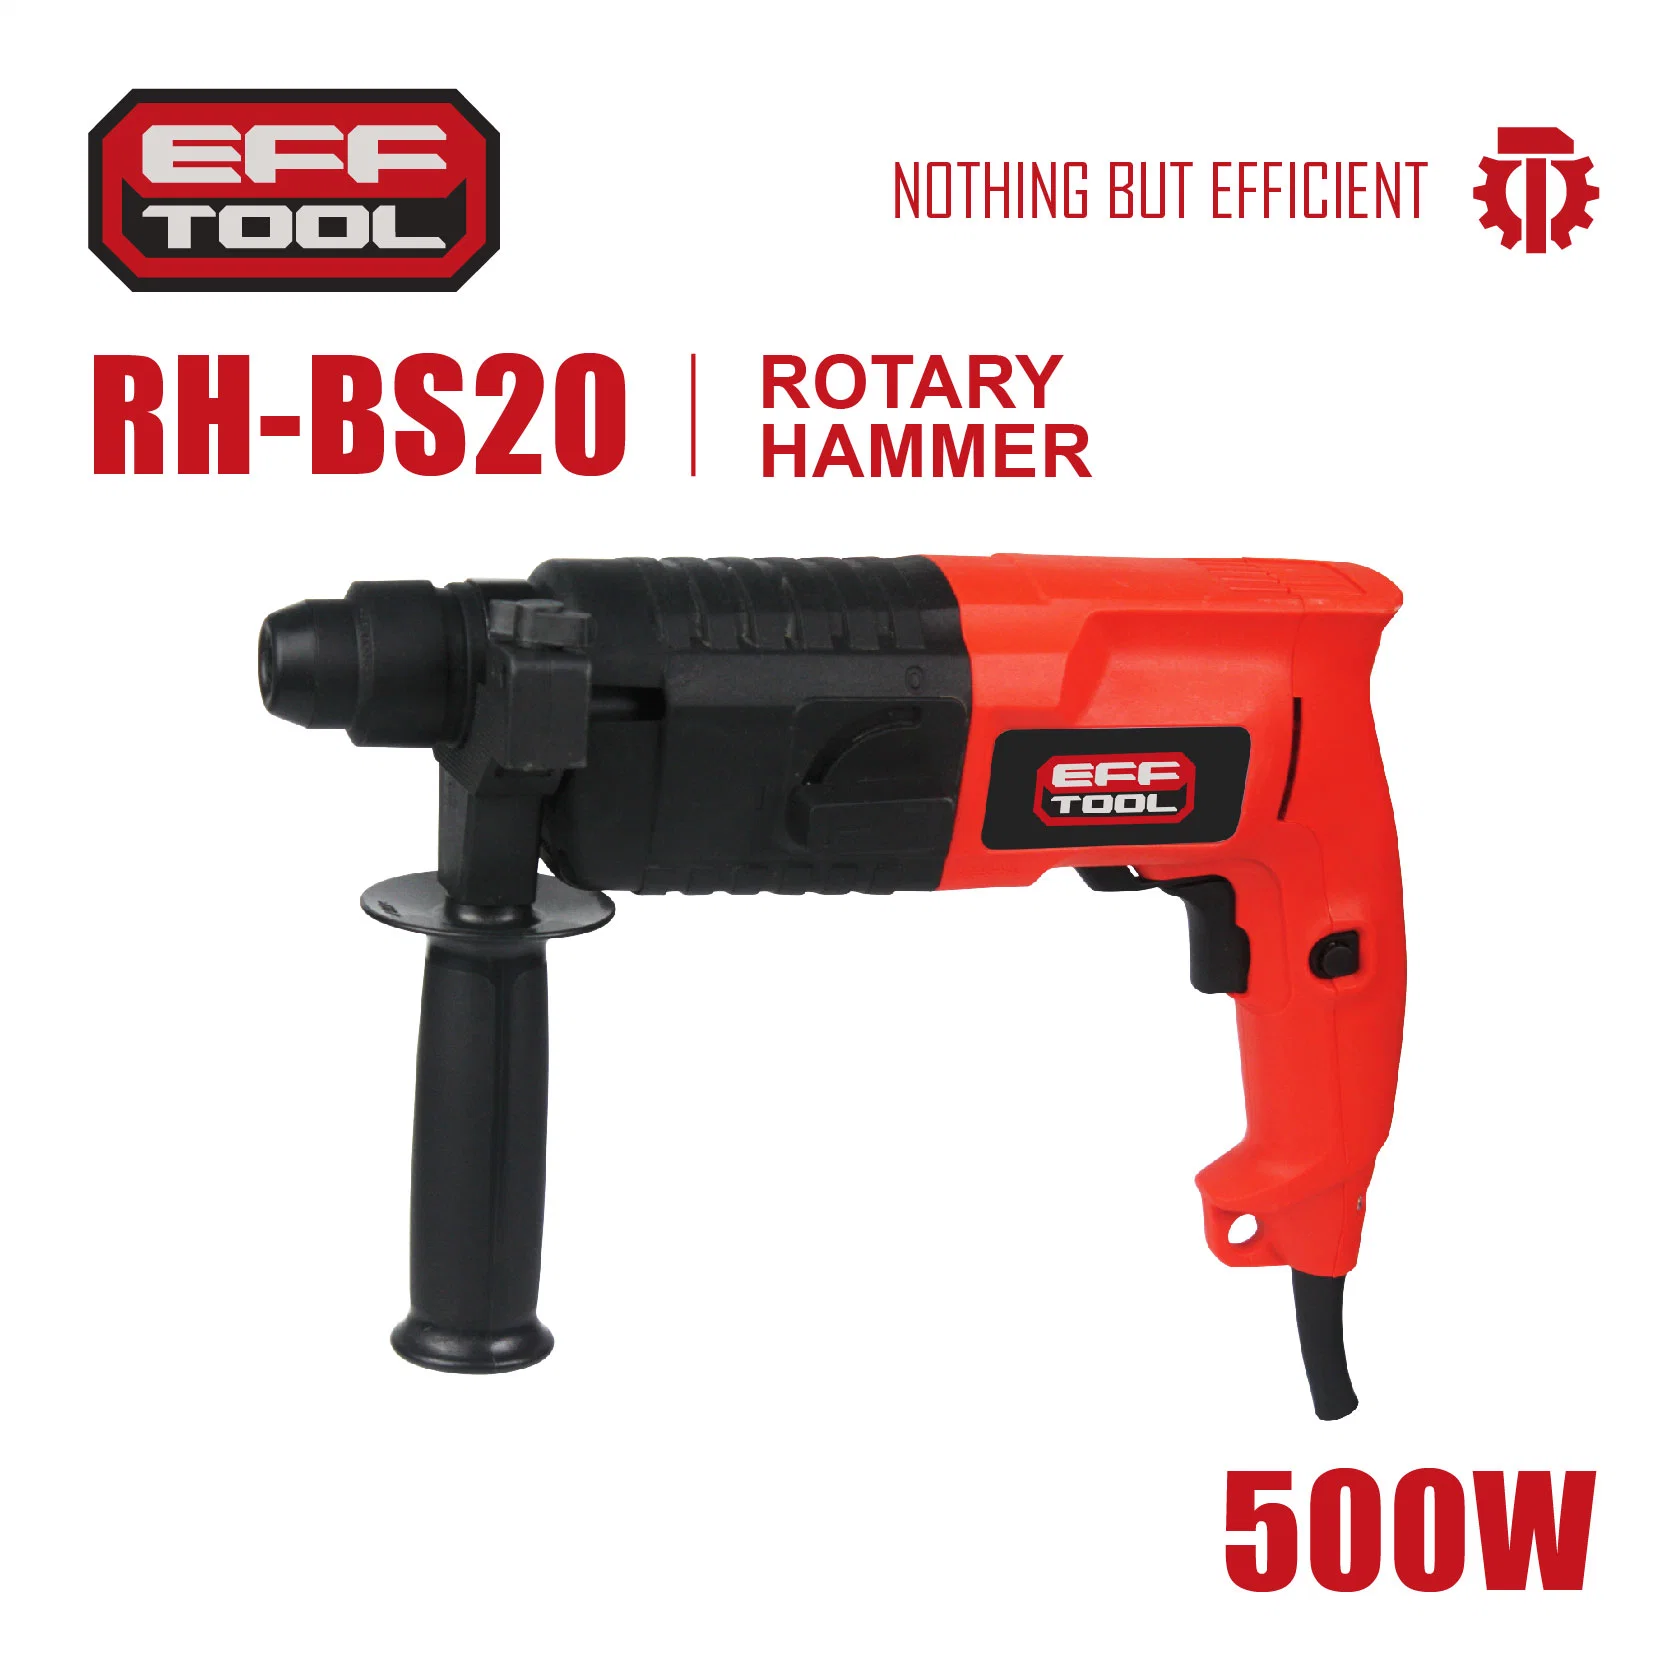 Efftool 500W 2.0j Electric Rotary Hammer with Good Quality